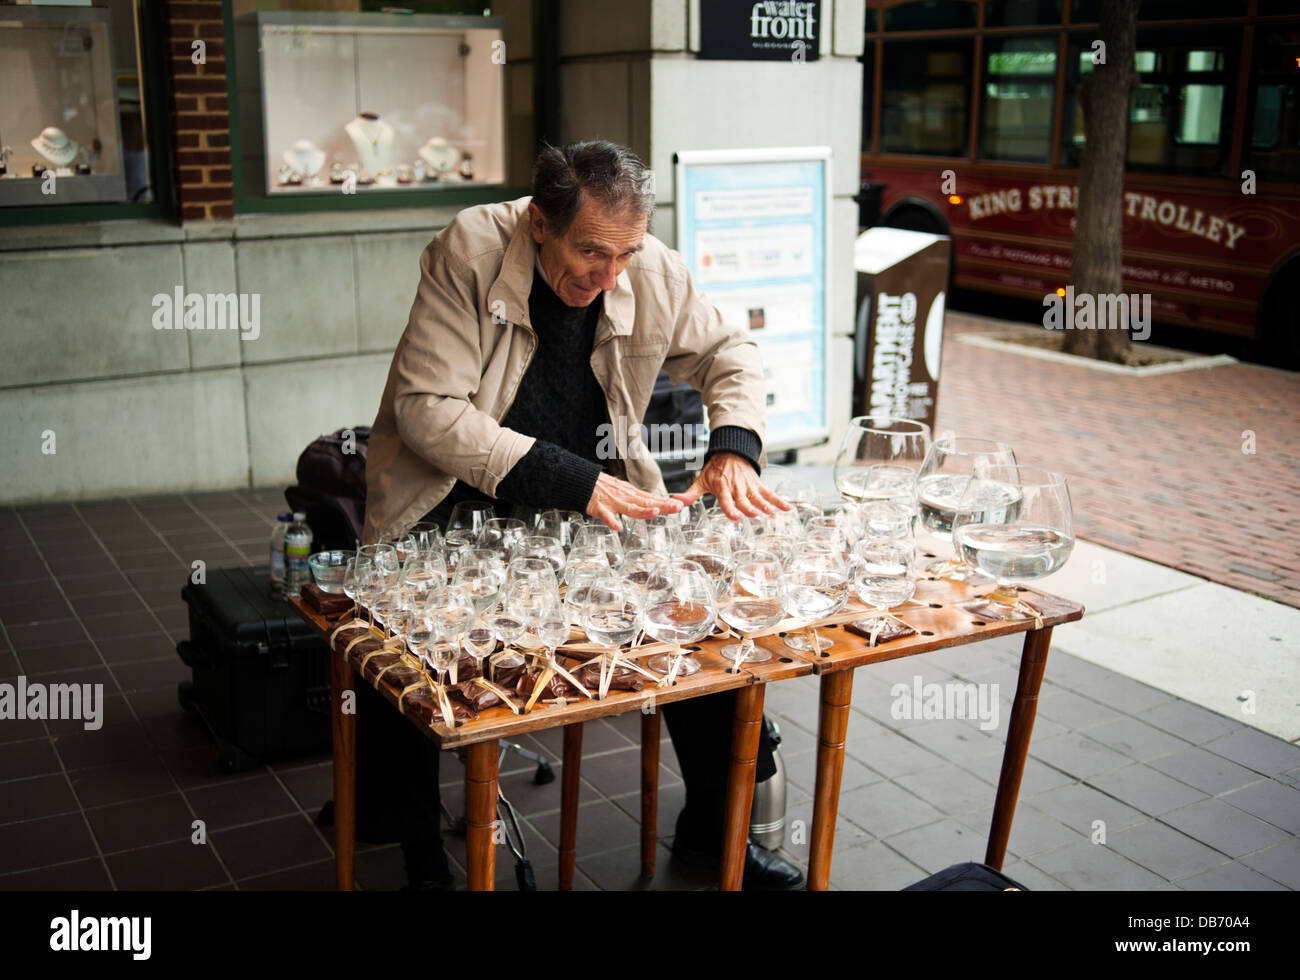 A man playing musical glasses known as a glass harp in Old Town Alexandria, Virginia Stock Photo